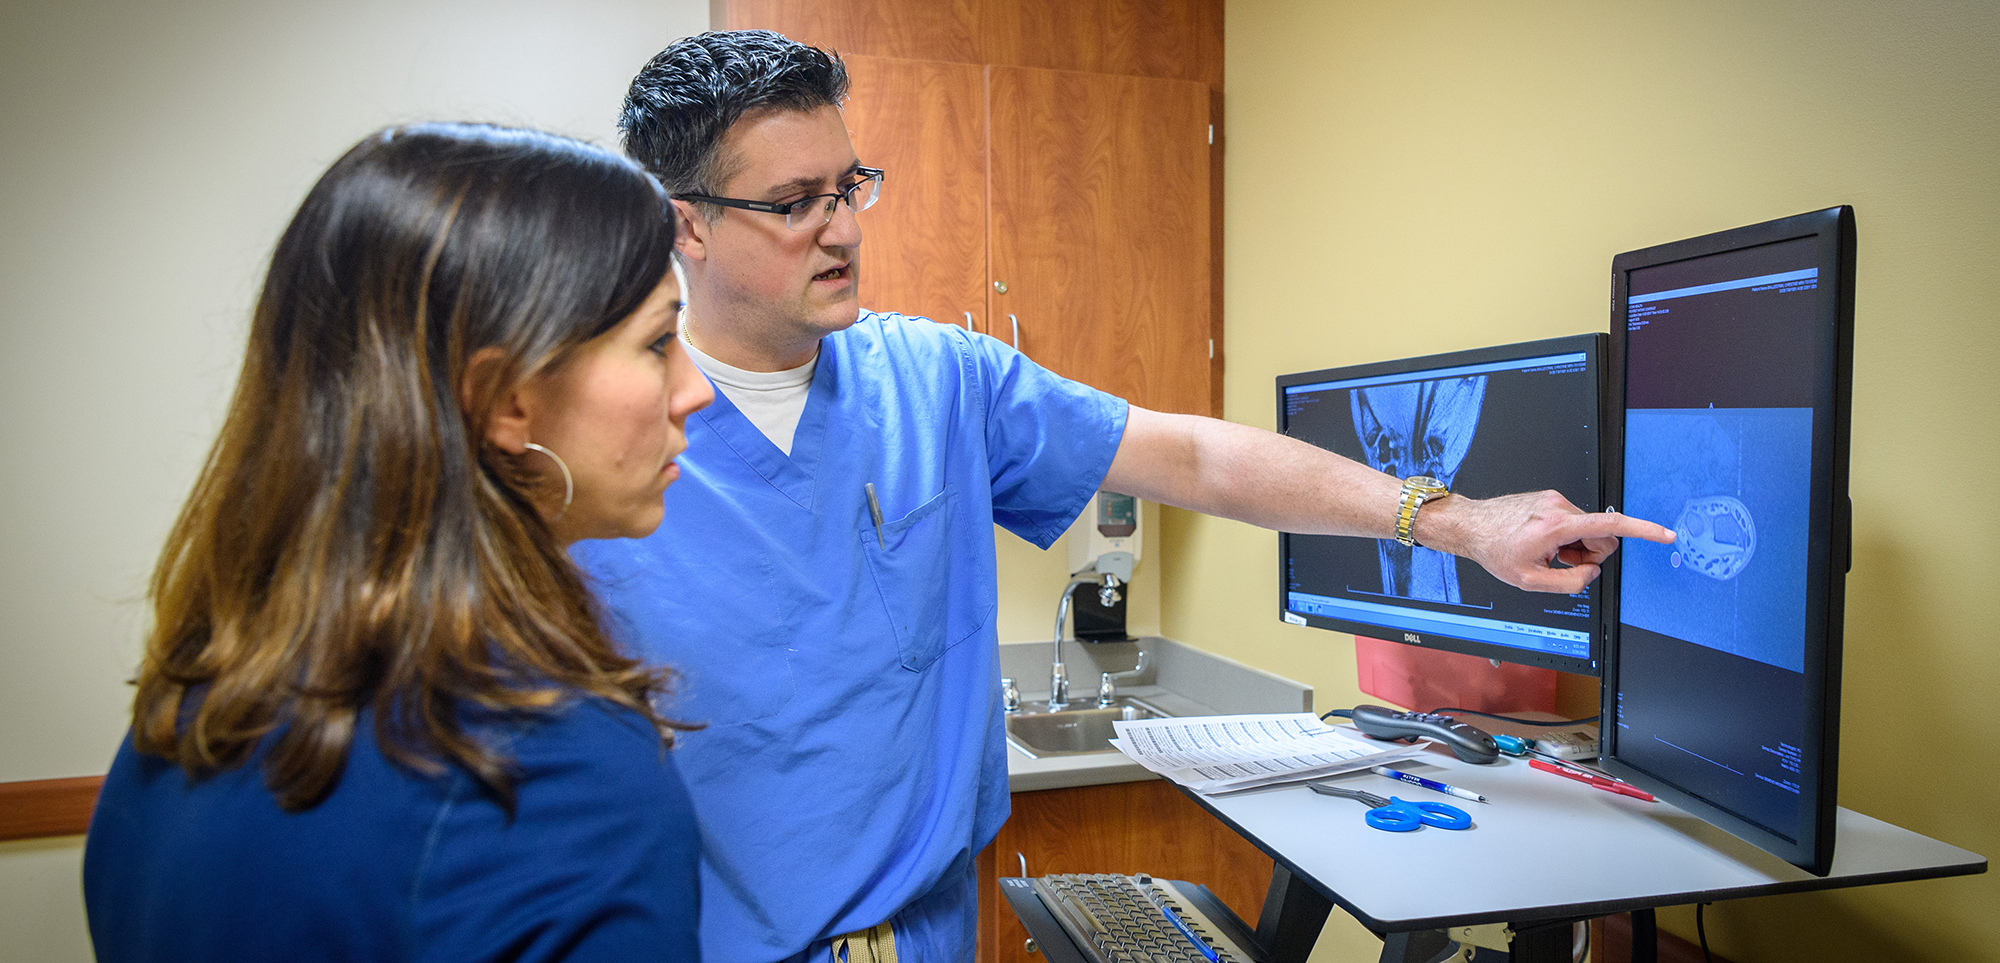 Dr. Joel Ferreira looking at an MRI with a patient